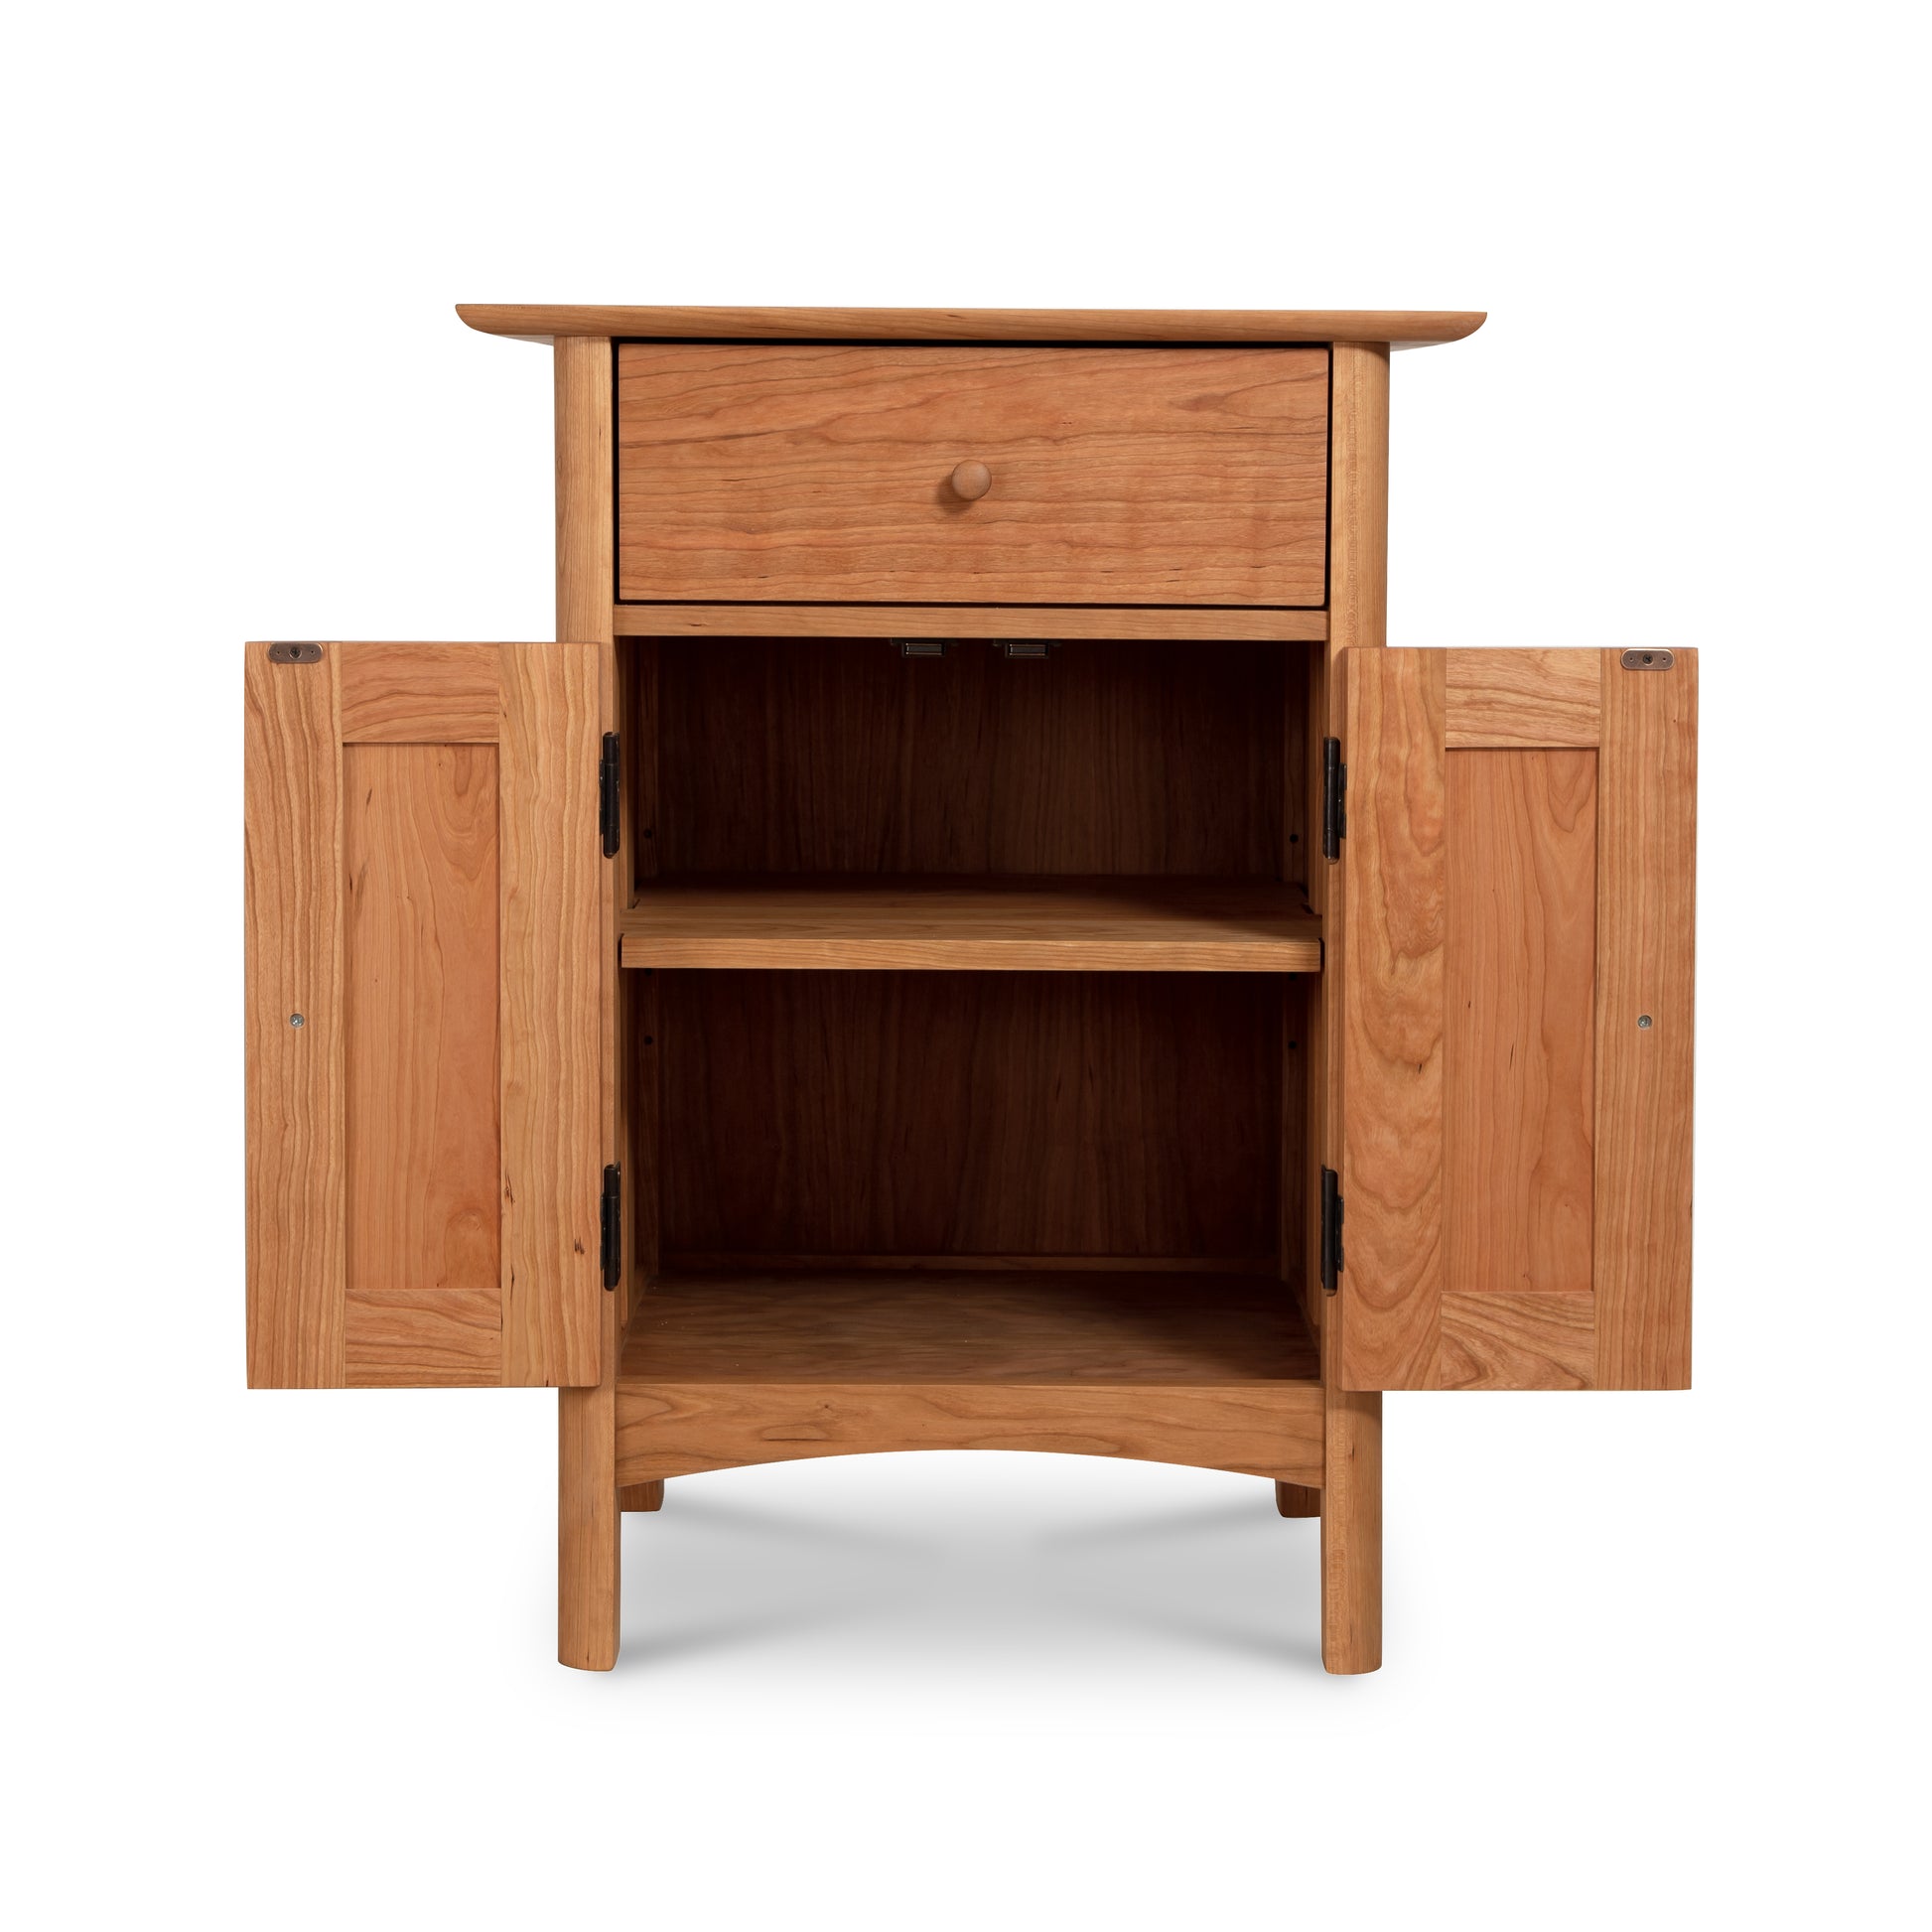 A luxury Vermont Furniture Designs Heartwood Shaker Short Storage Chest with an open shelf.